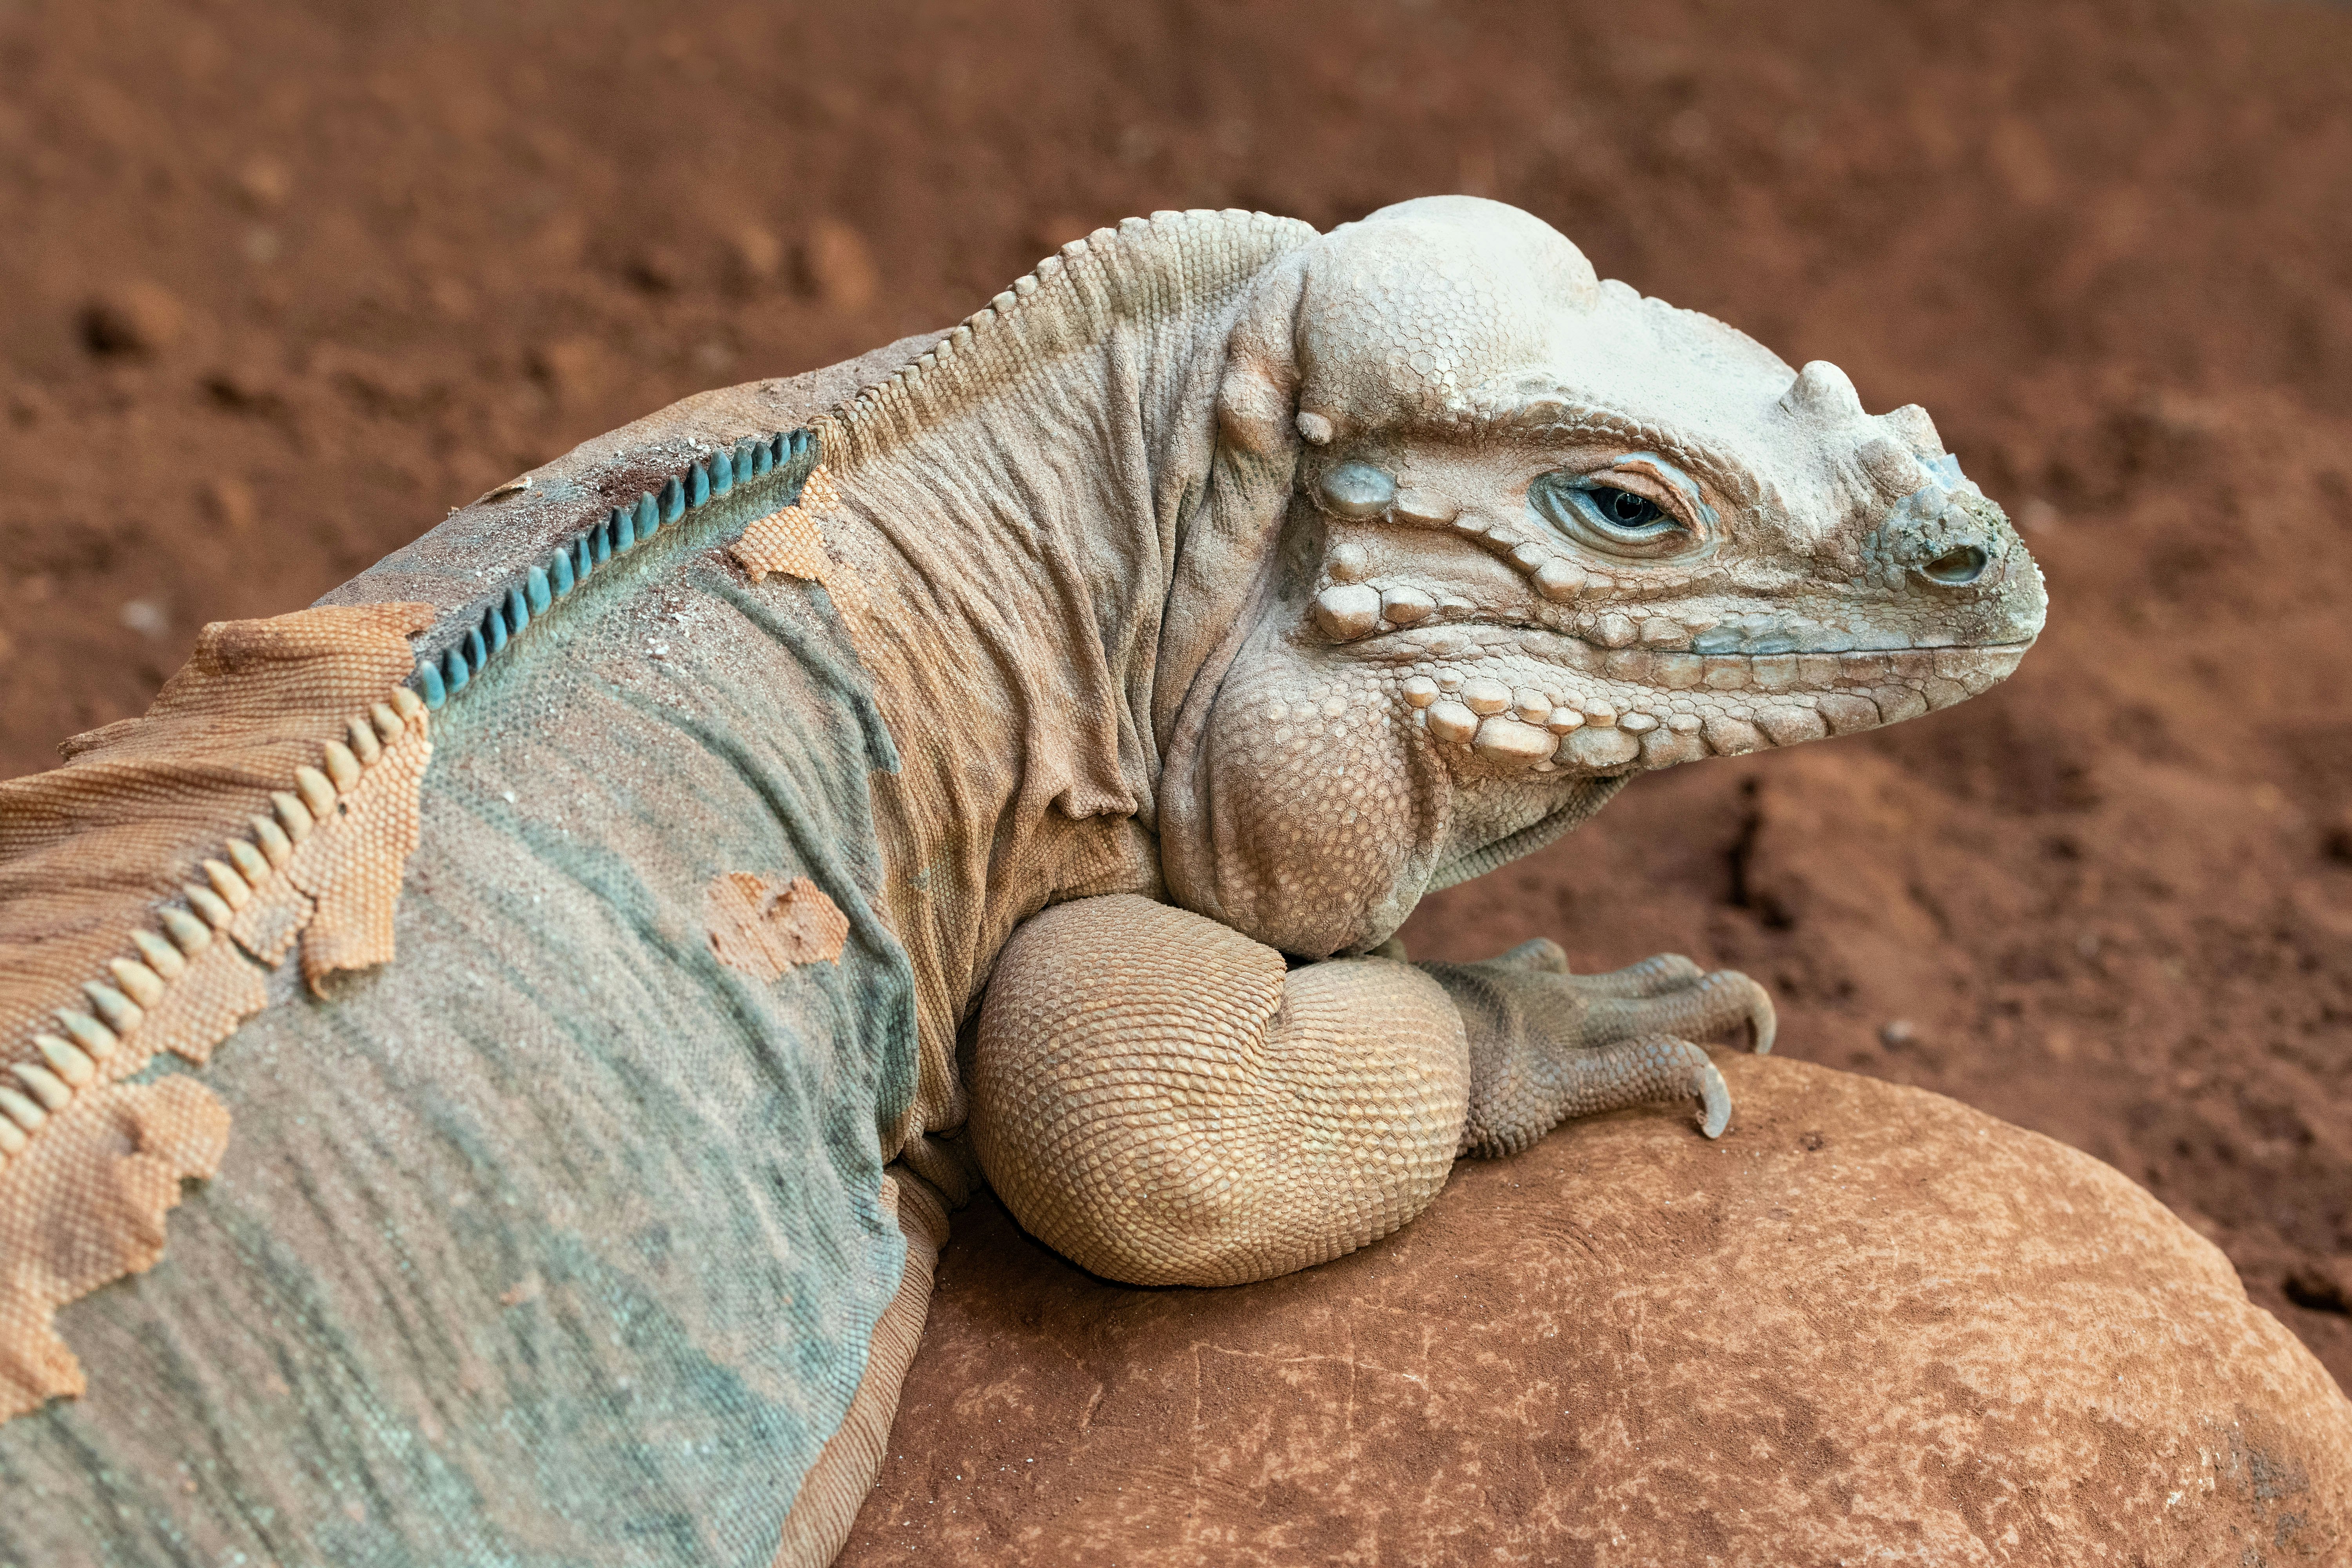 gray and blue iguana on brown rock